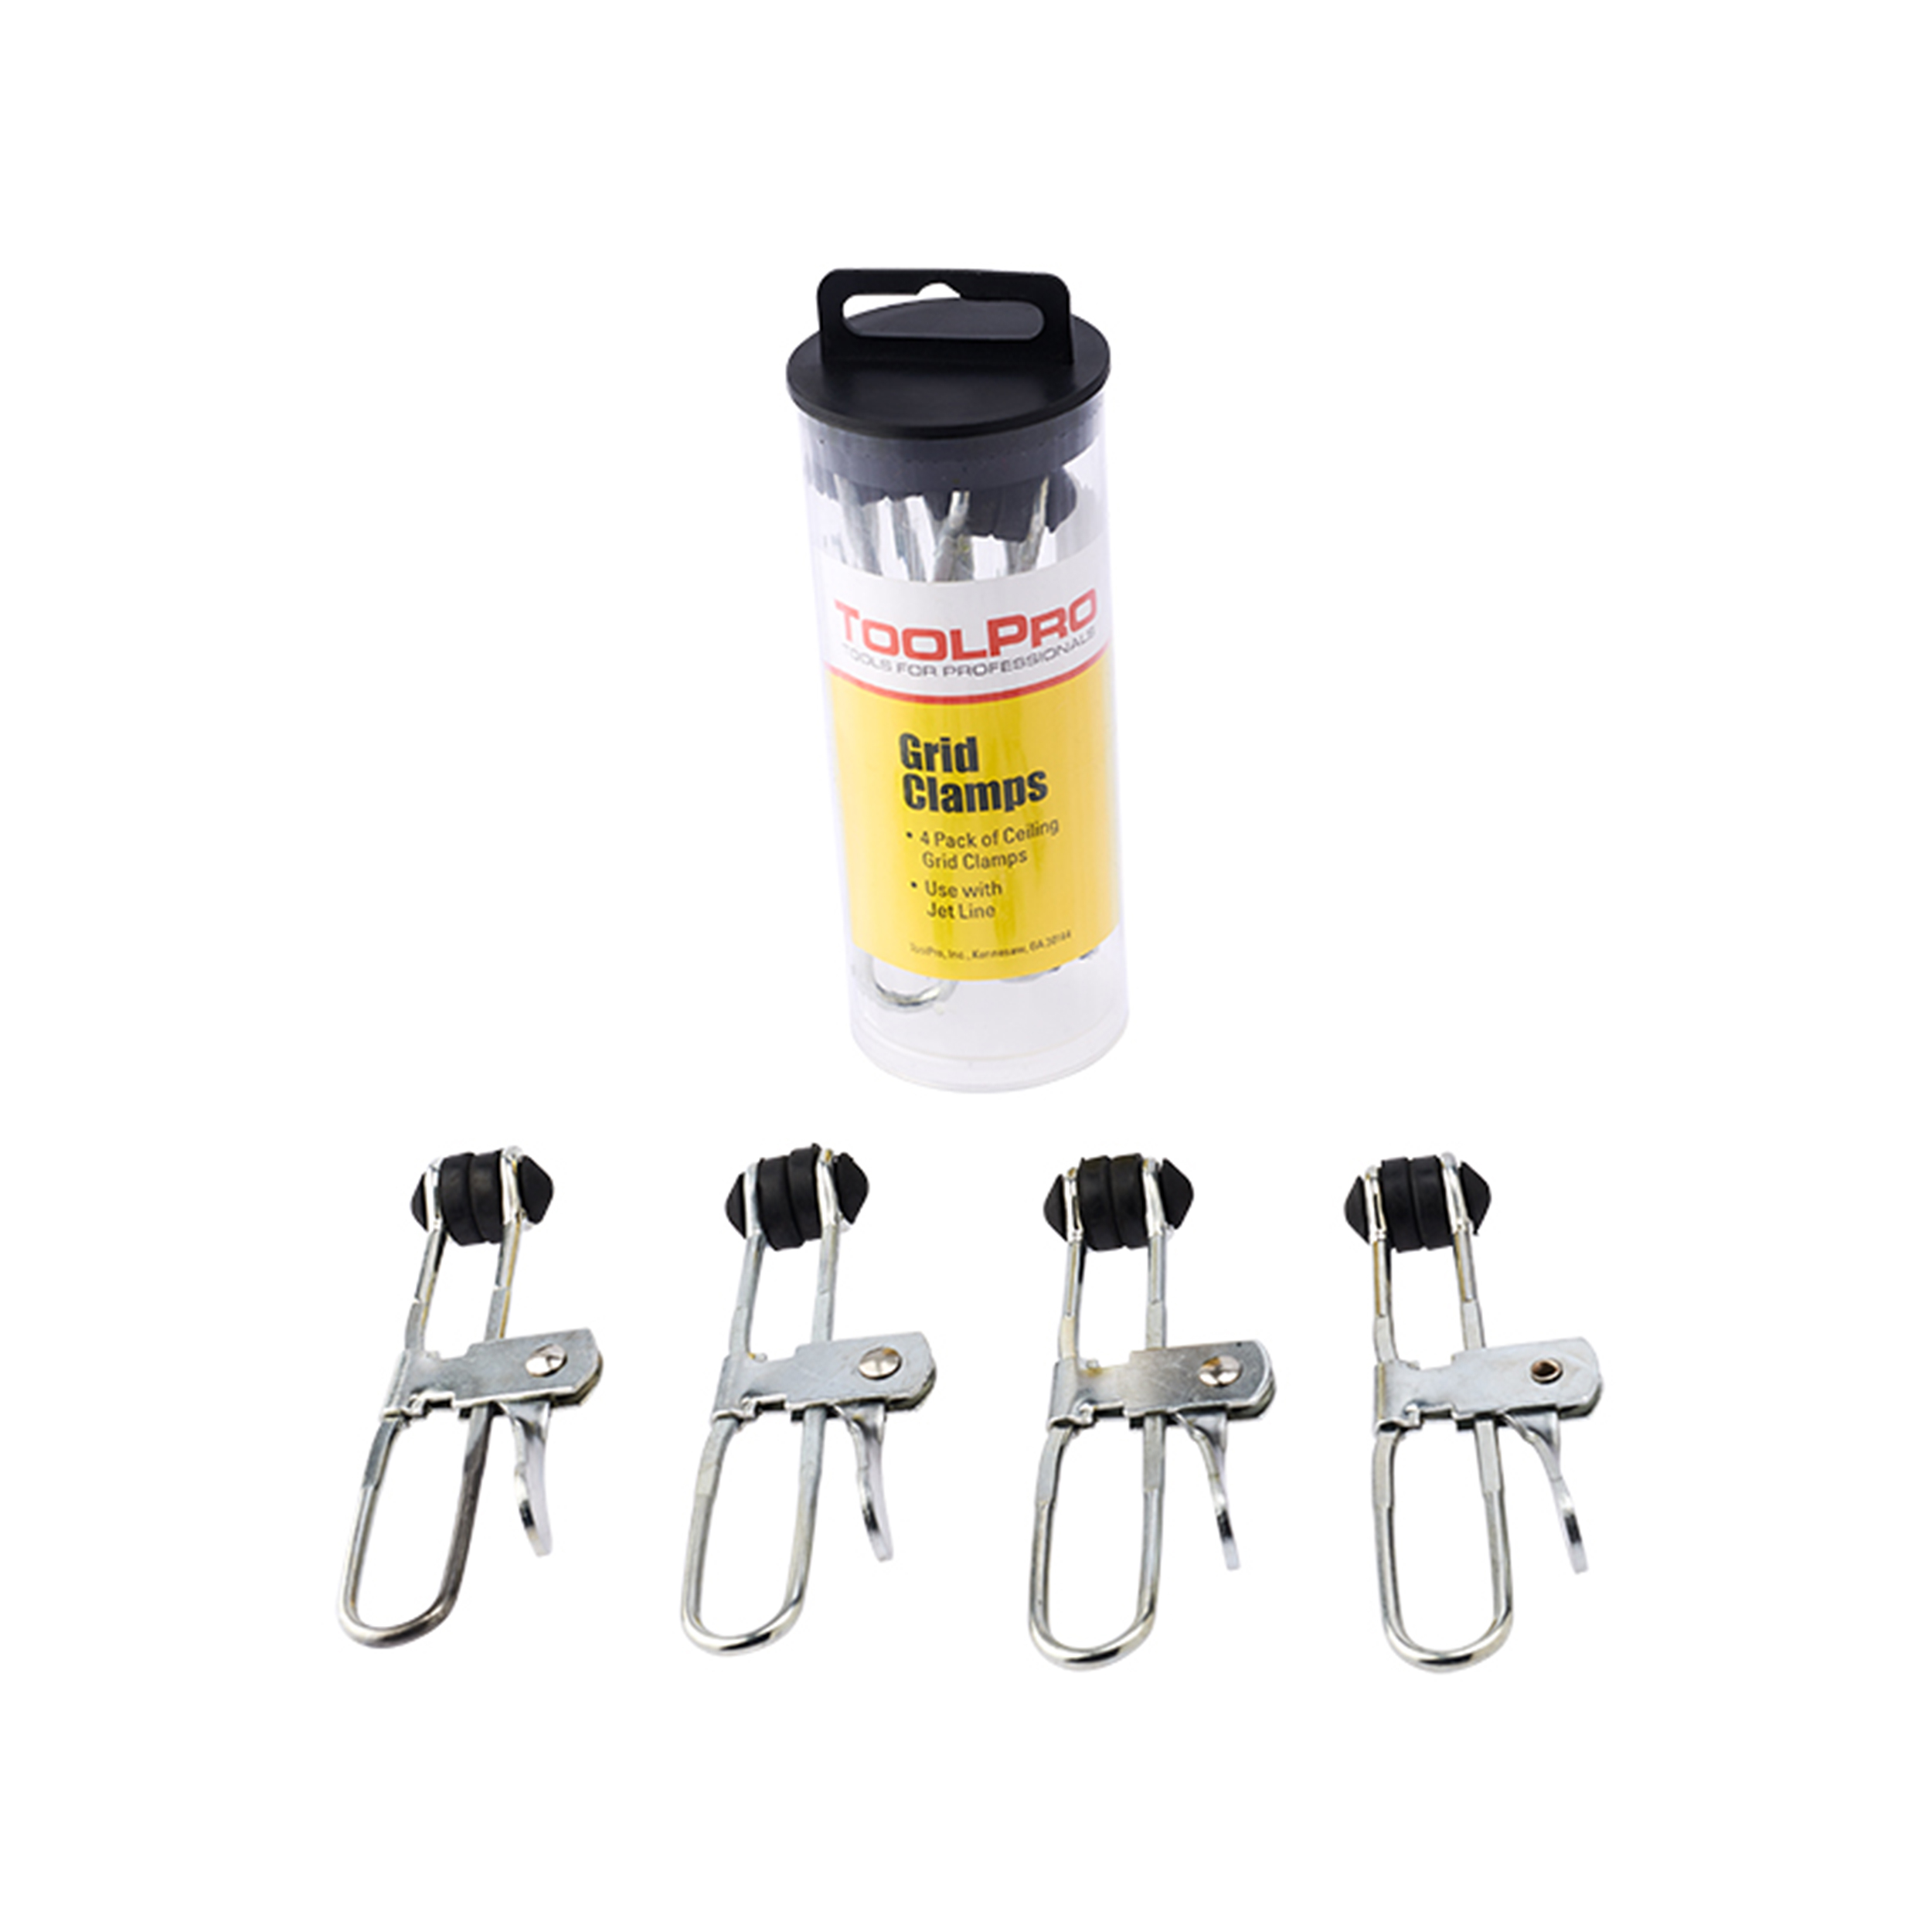 4" Grid Clamp, 4-pack